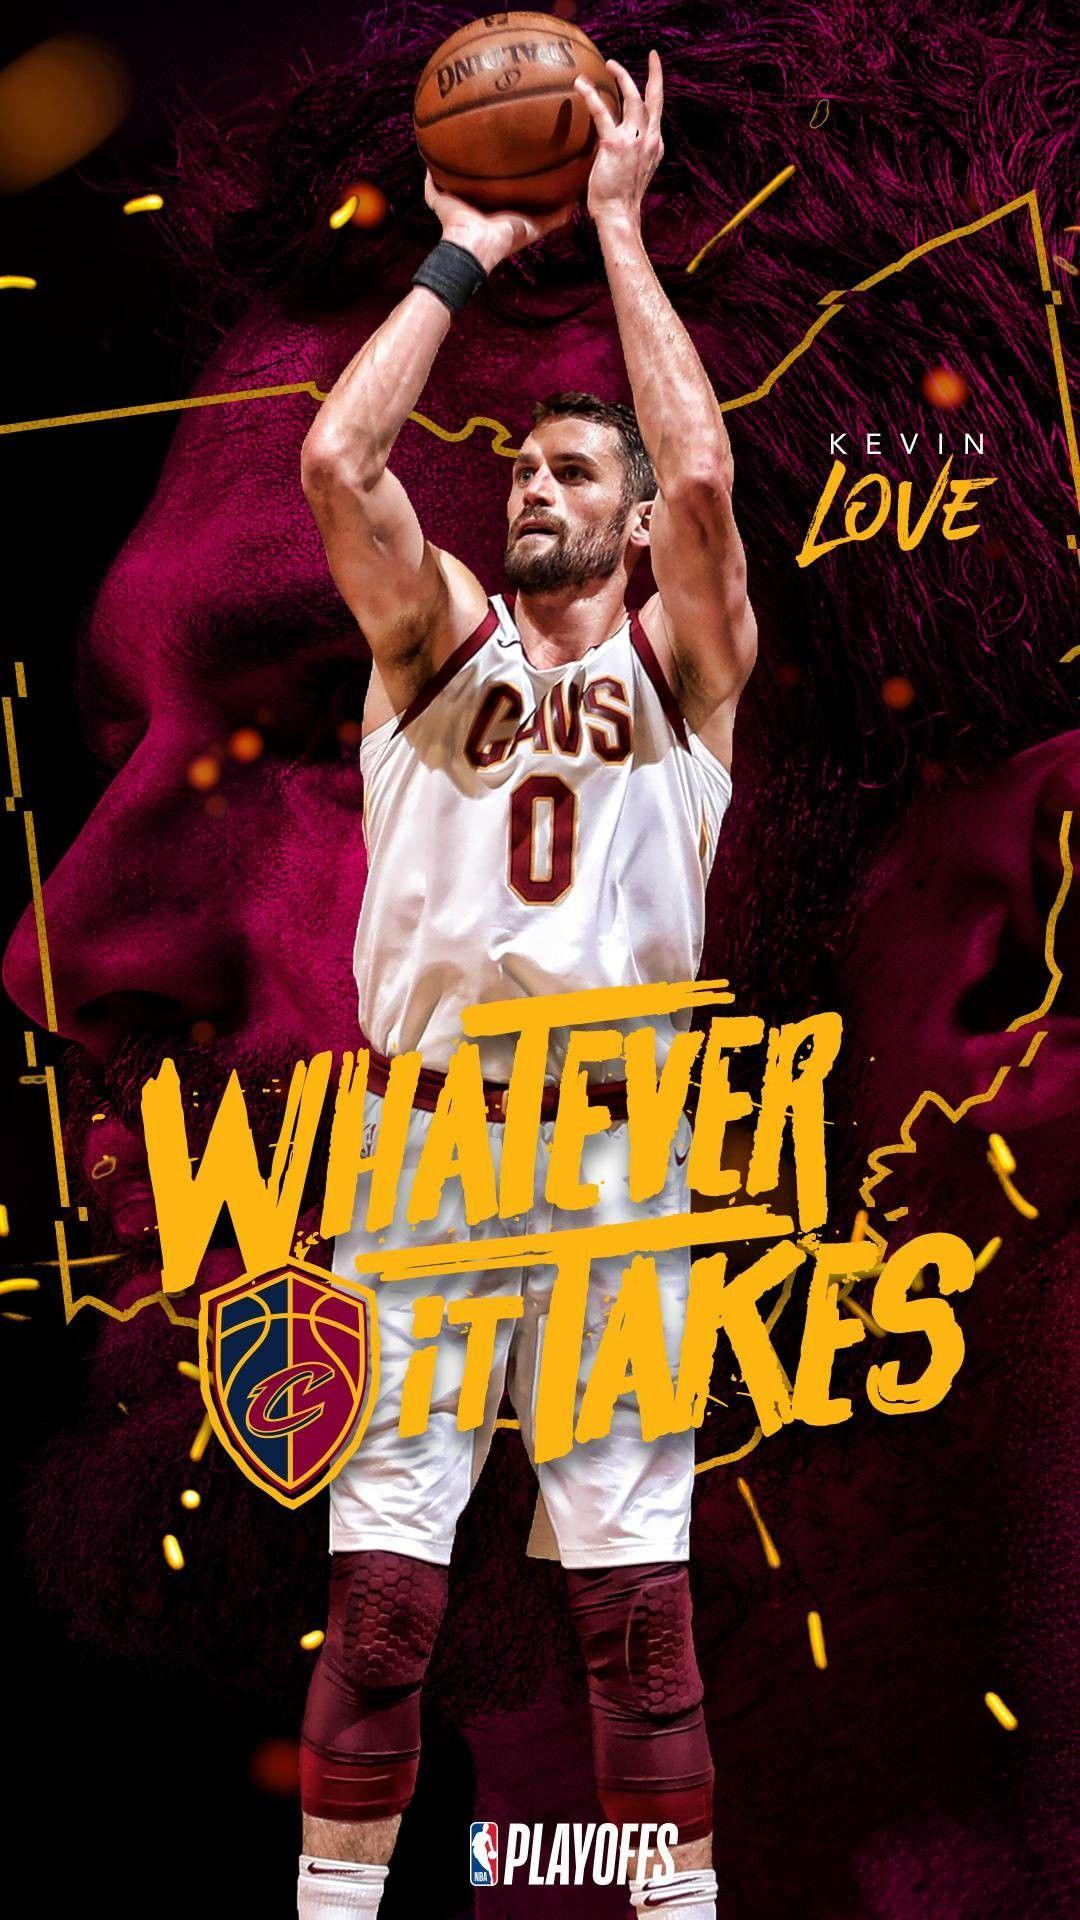 A great wallpaper of Kevin Love shooting a basket. Basketball